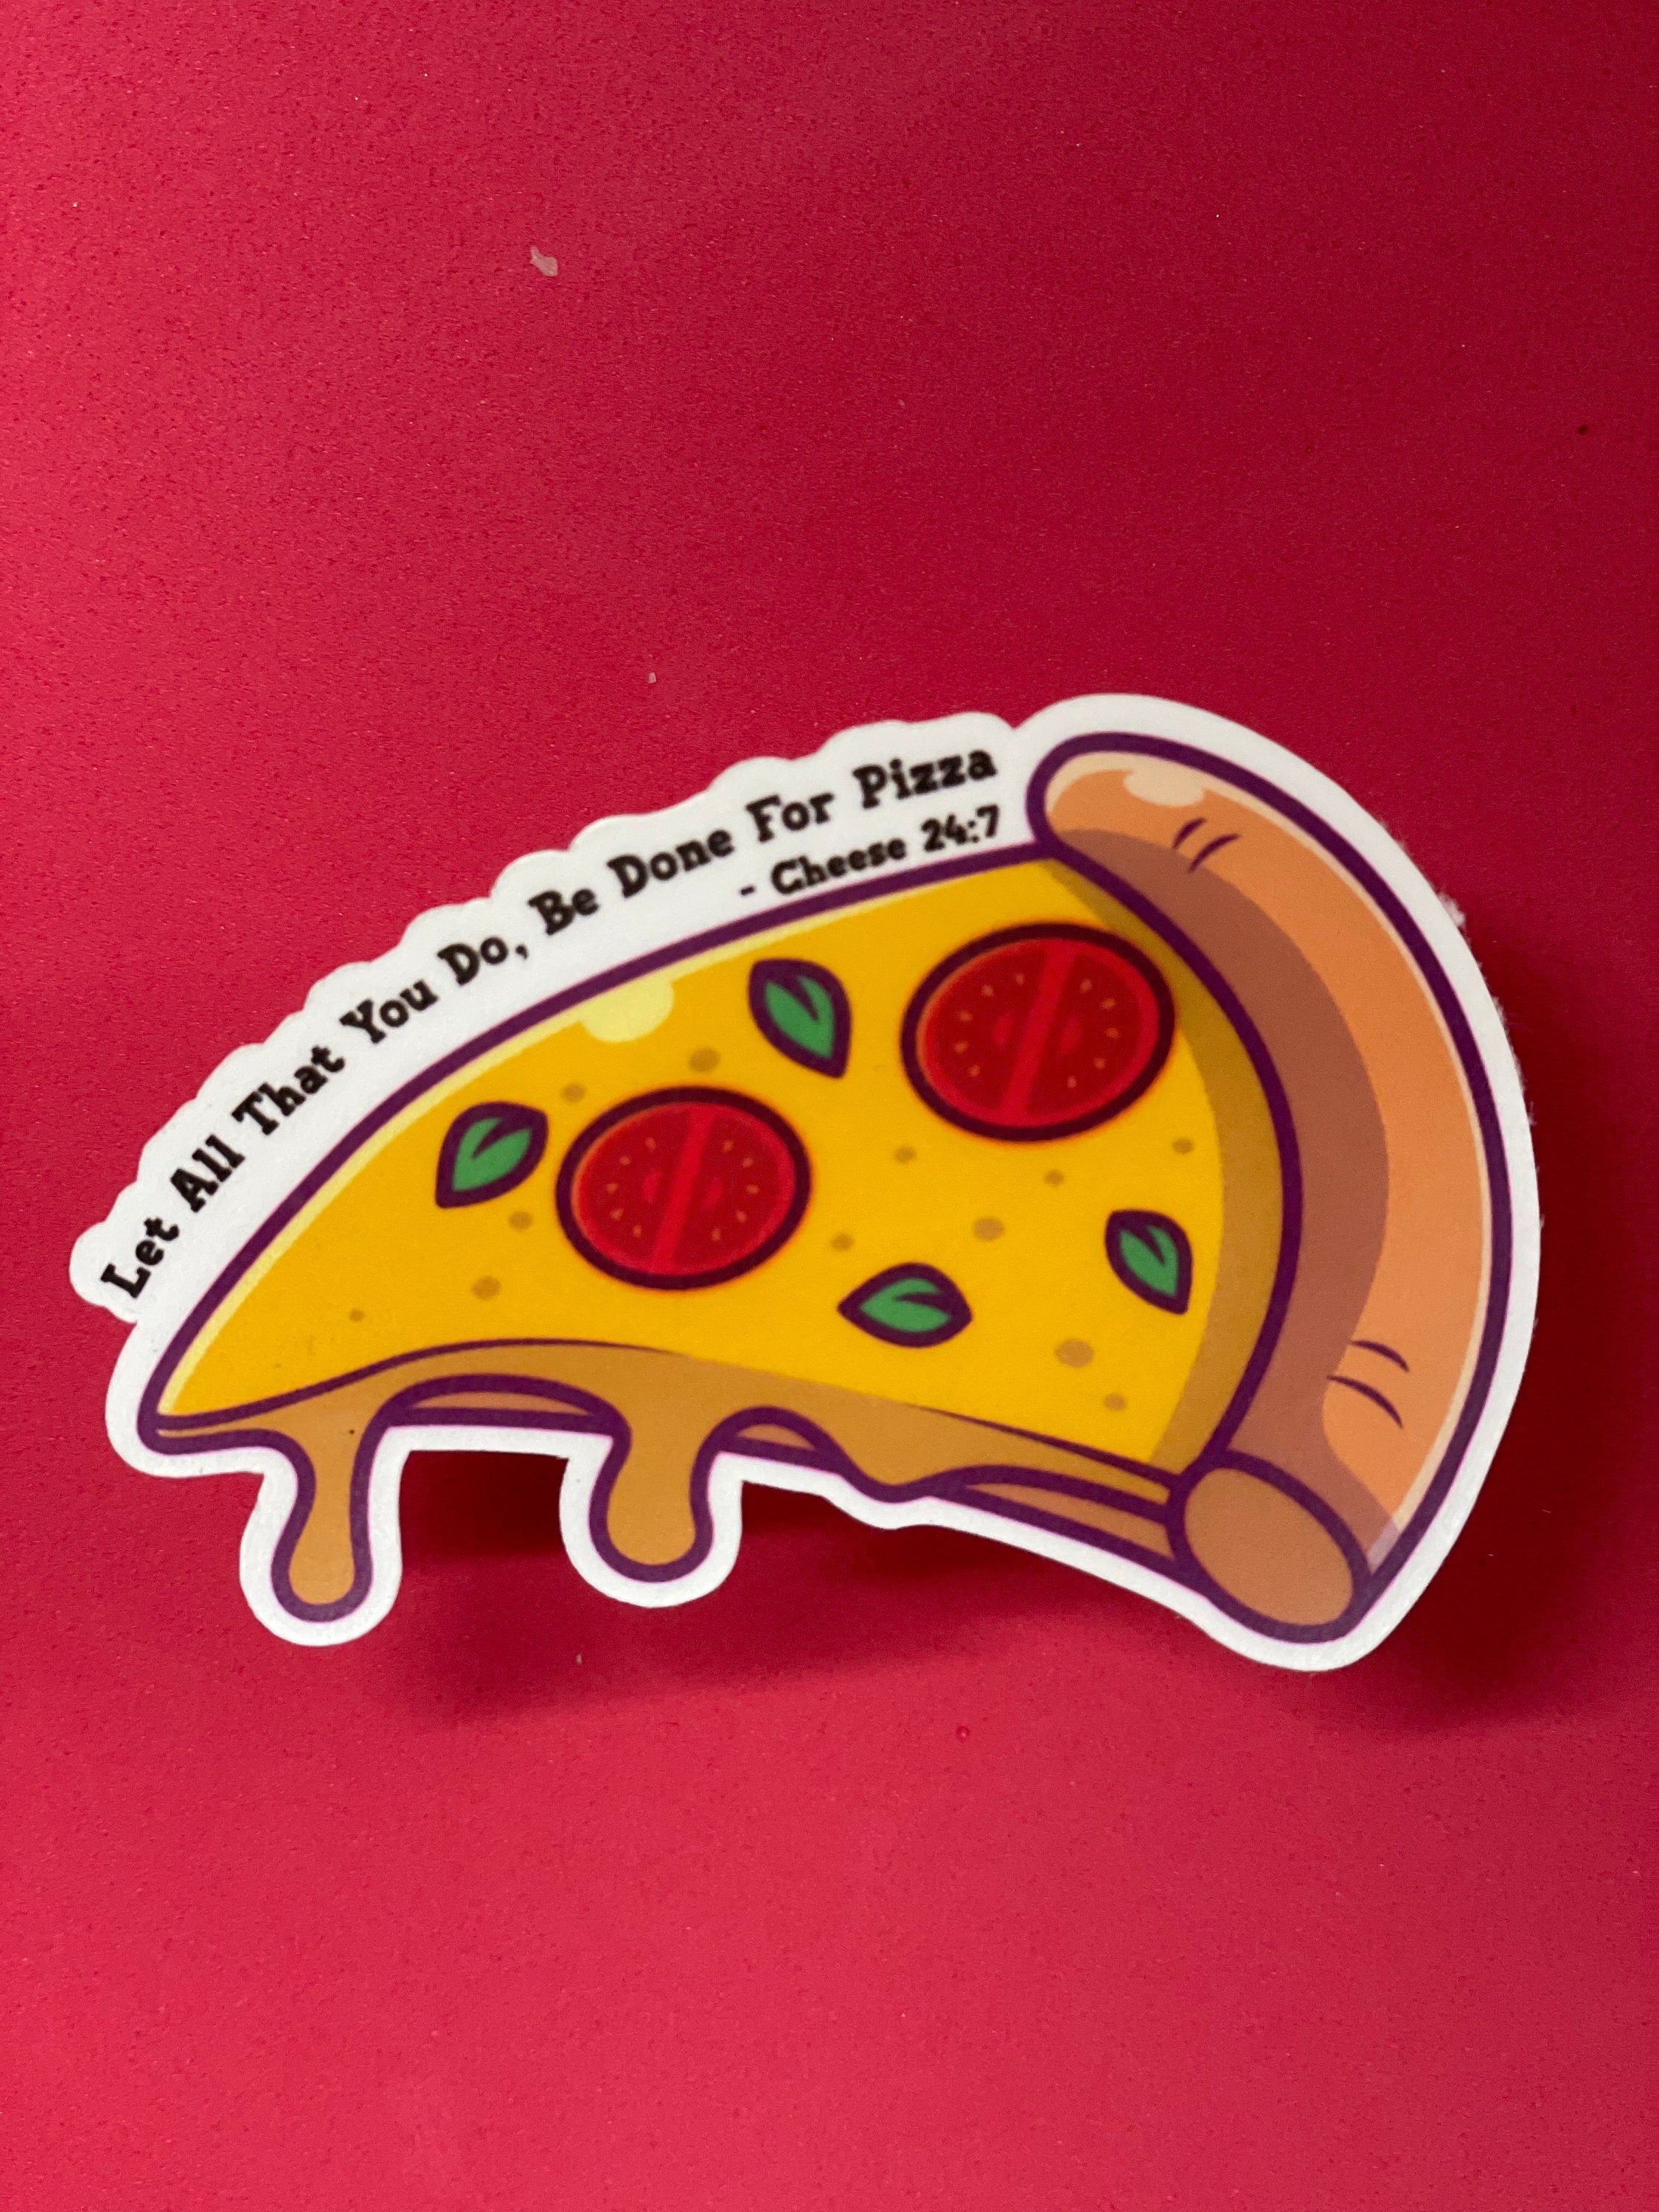 Let All You Do Be Done For Pizza -24:7 Sticker